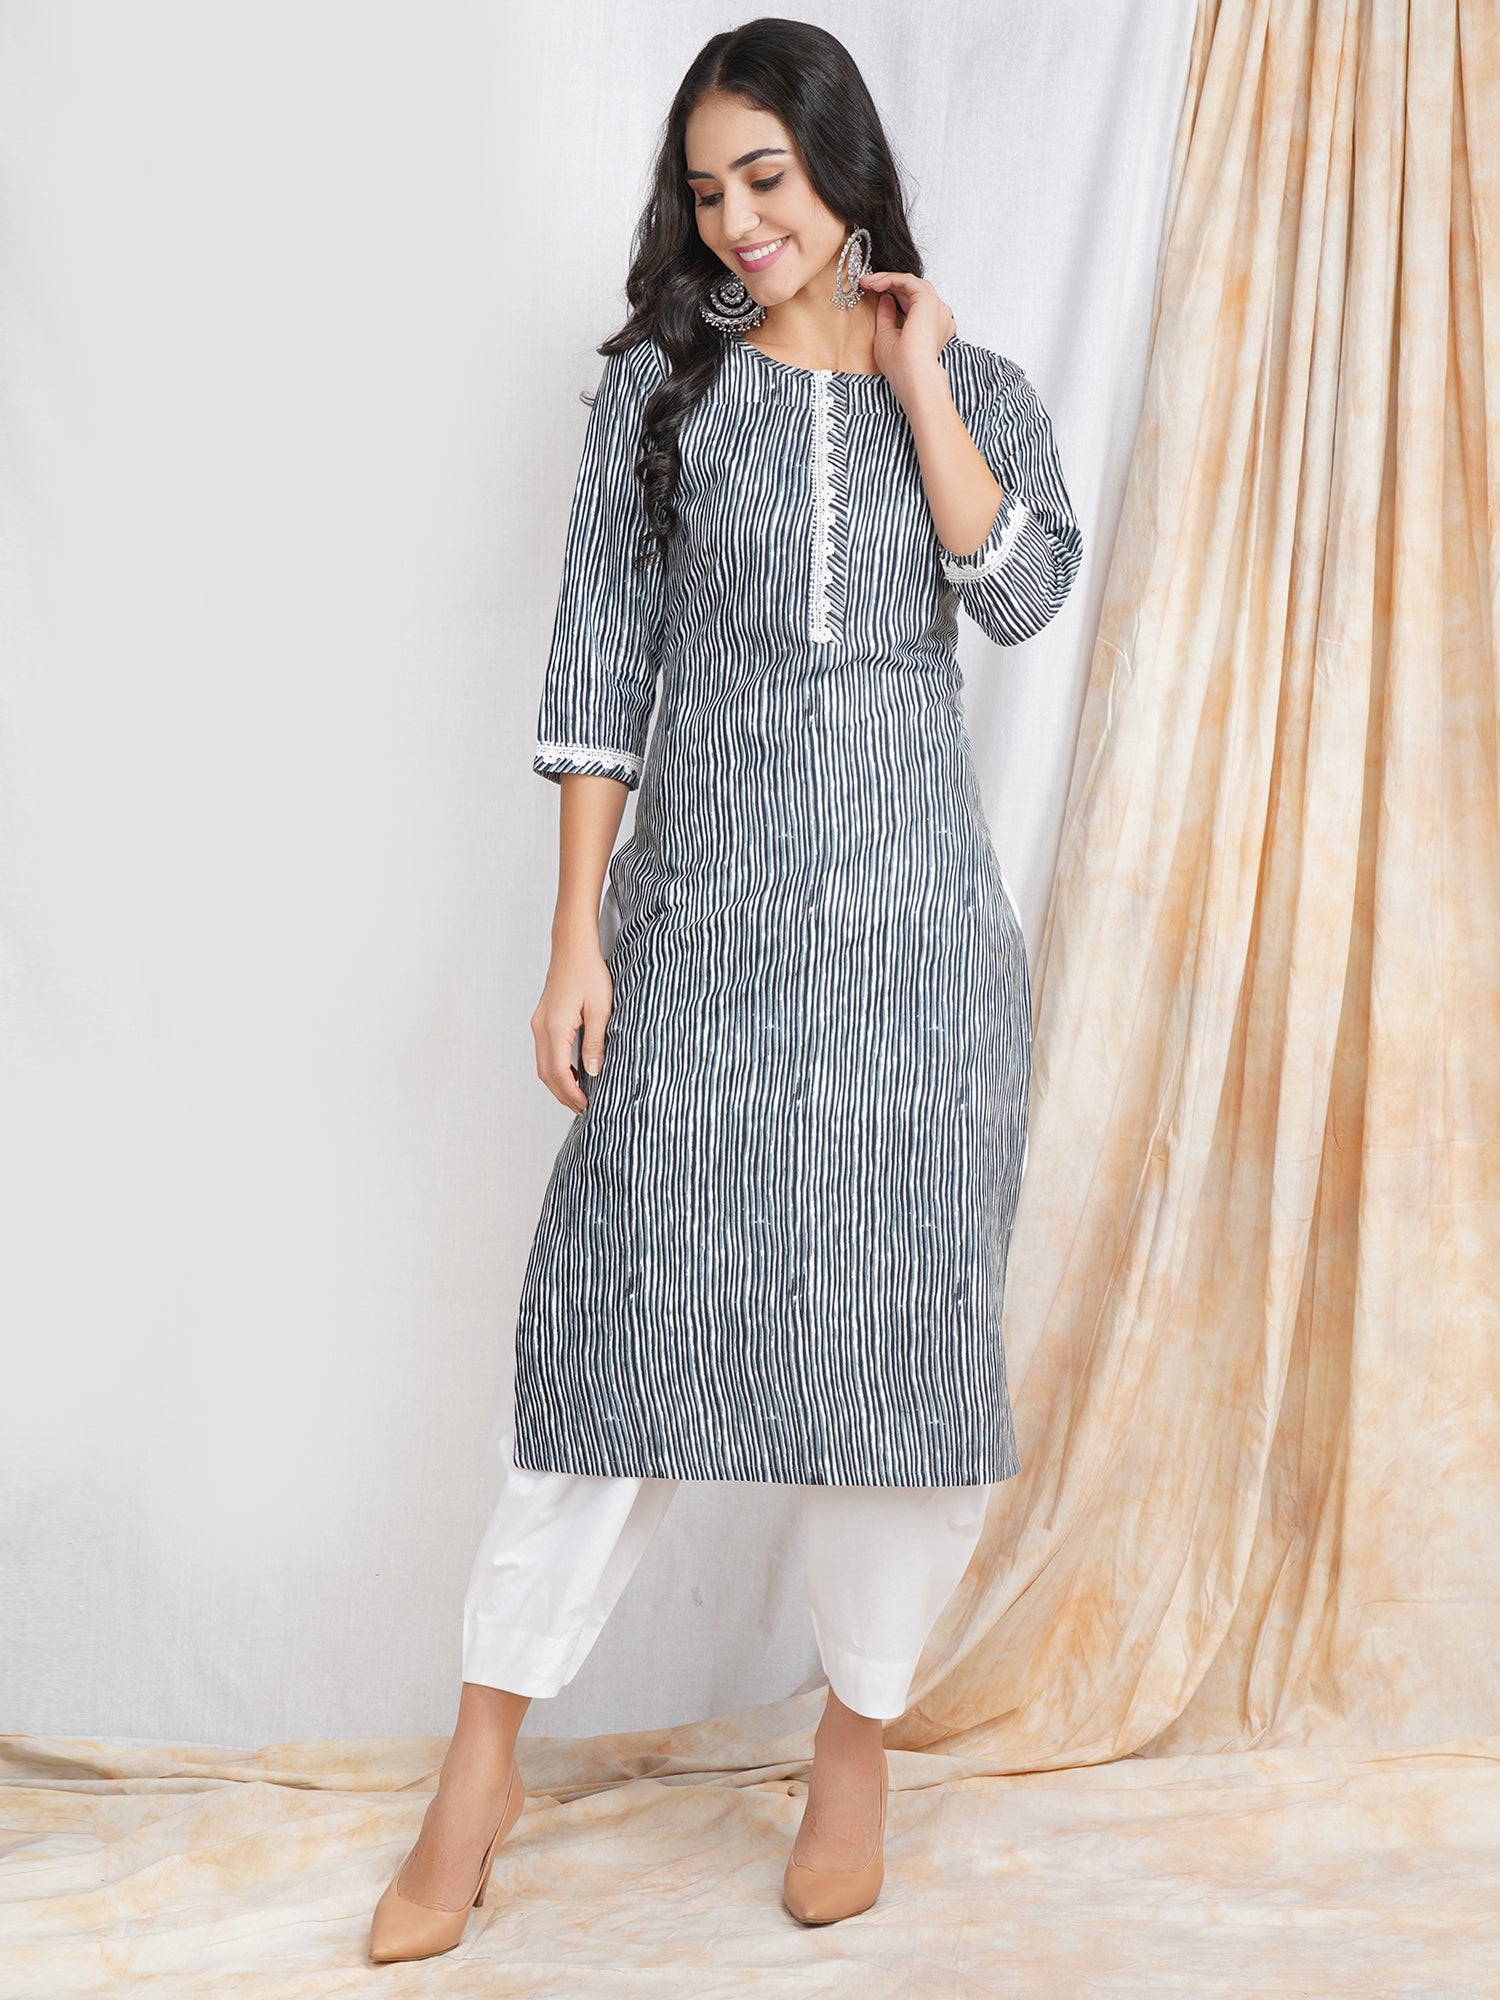 Buy Pink High Low Kurti With Dhoti Pants by Designer PETTICOAT LANE BY  DIVYA Online at Ogaan.com